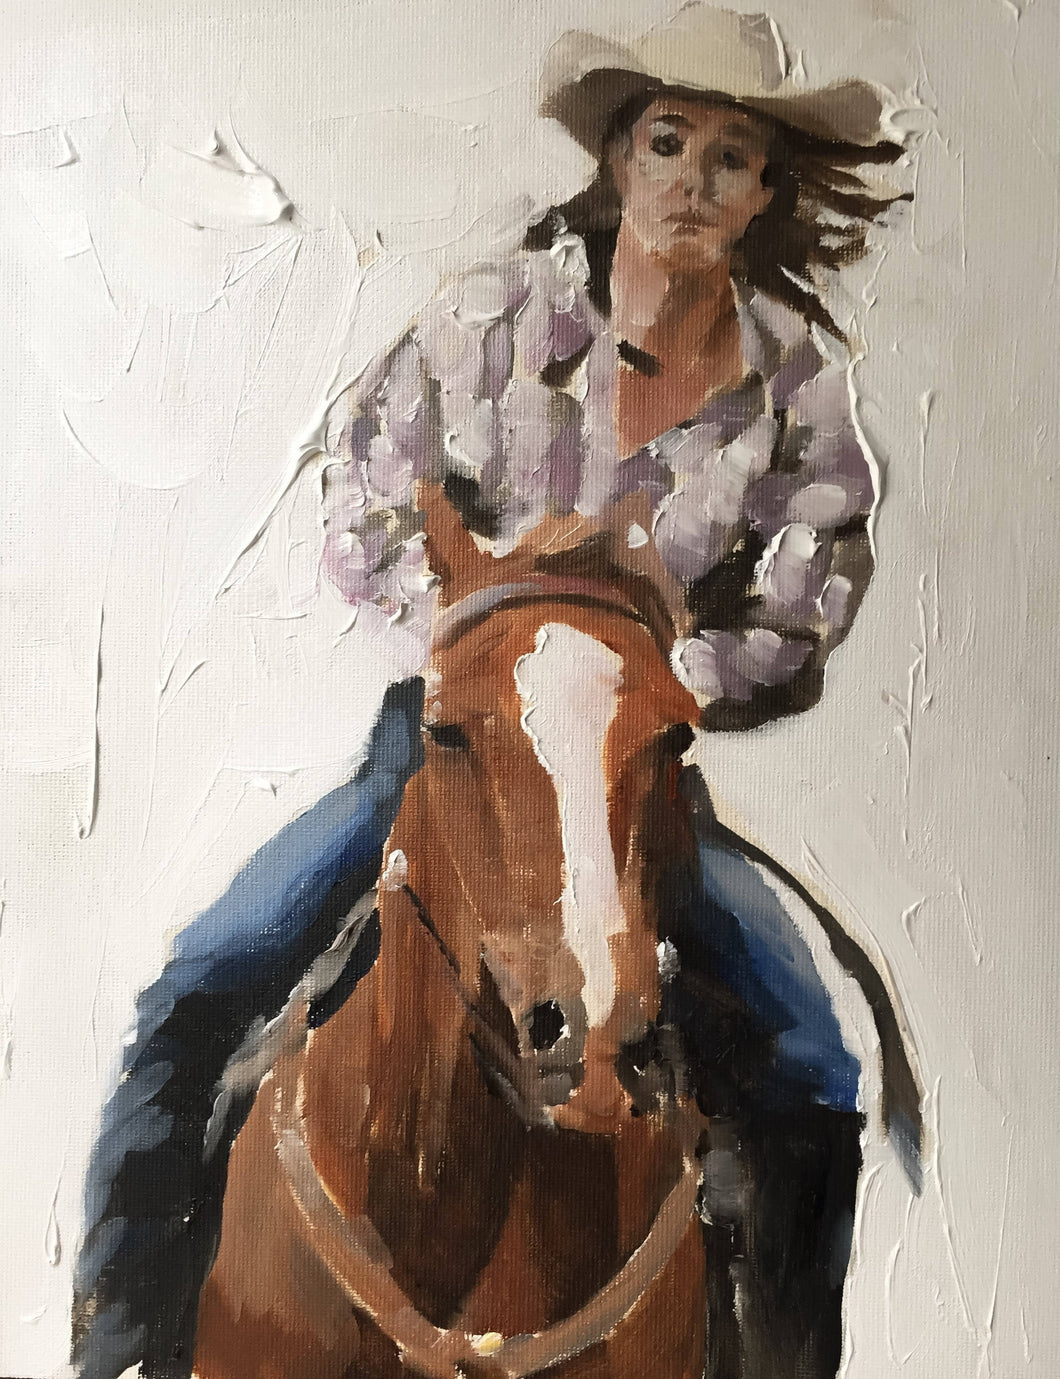 Woman Horse Riding Painting, Prints, Canvas, Posters, Originals, Commissions, Fine Art - from original oil painting by James Coates